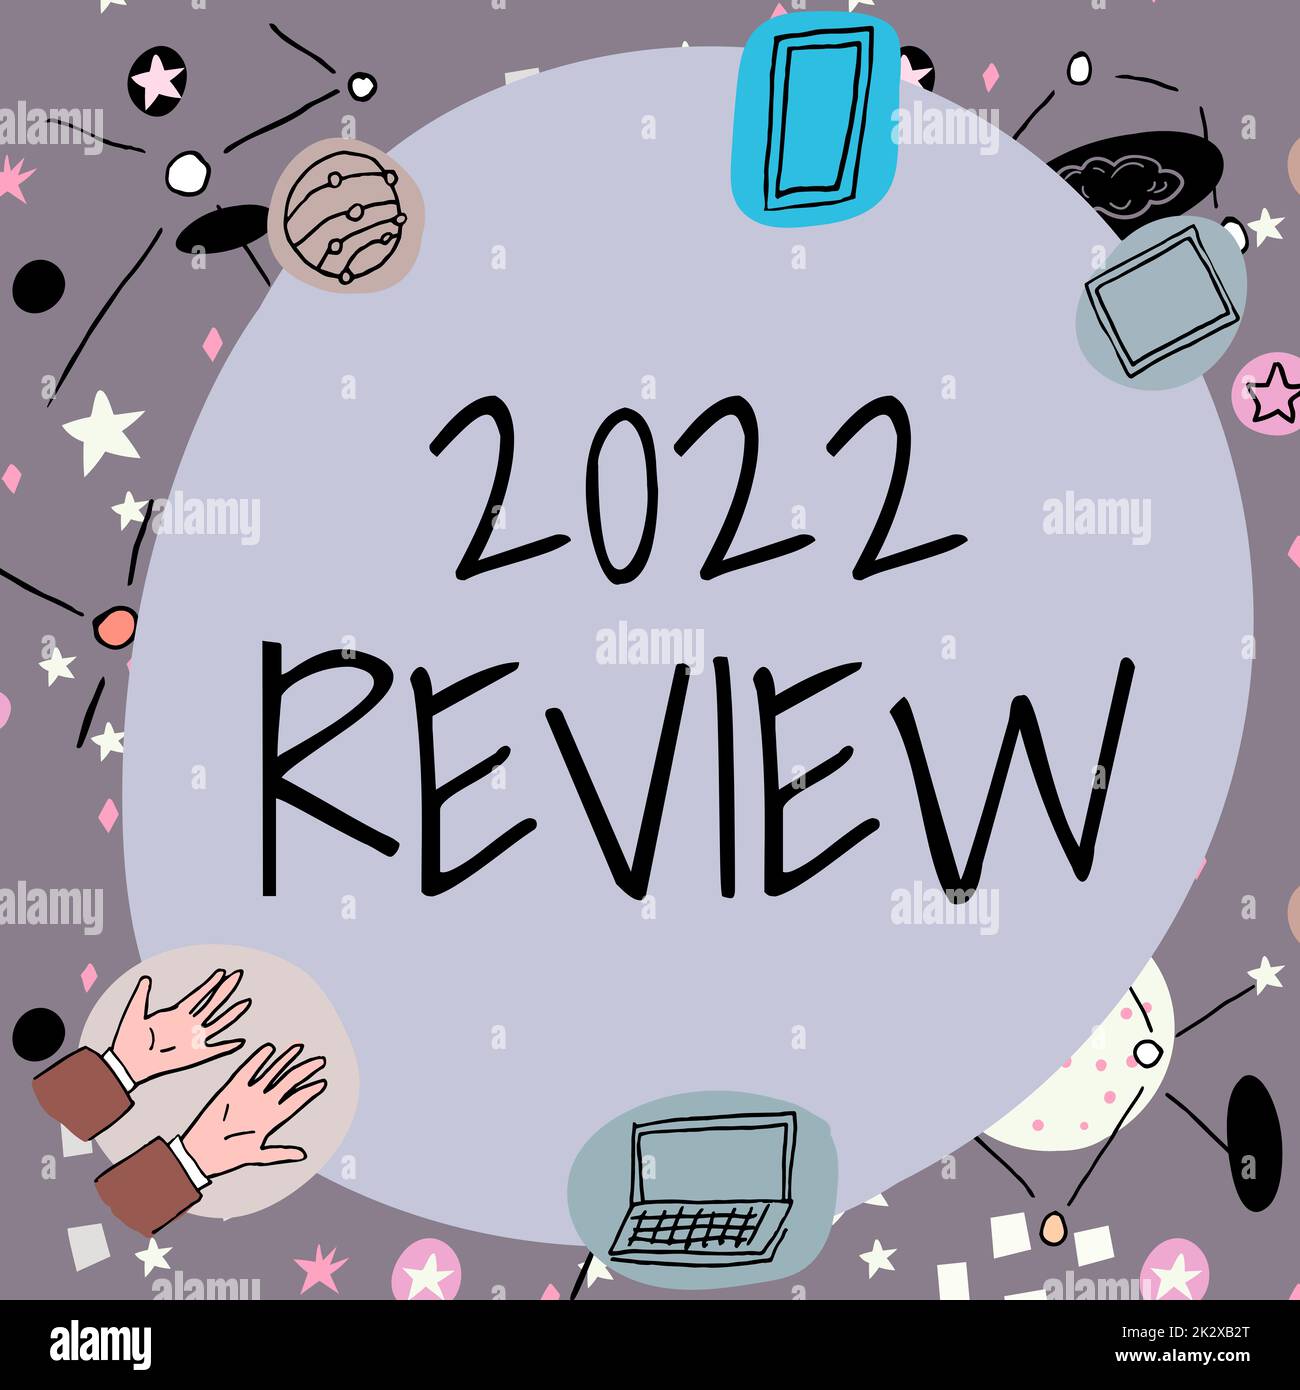 Sign displaying 2022 Review. Business overview seeing important events or actions that made previous year Blank frame decorated with modern science symbols displaying technology. Stock Photo